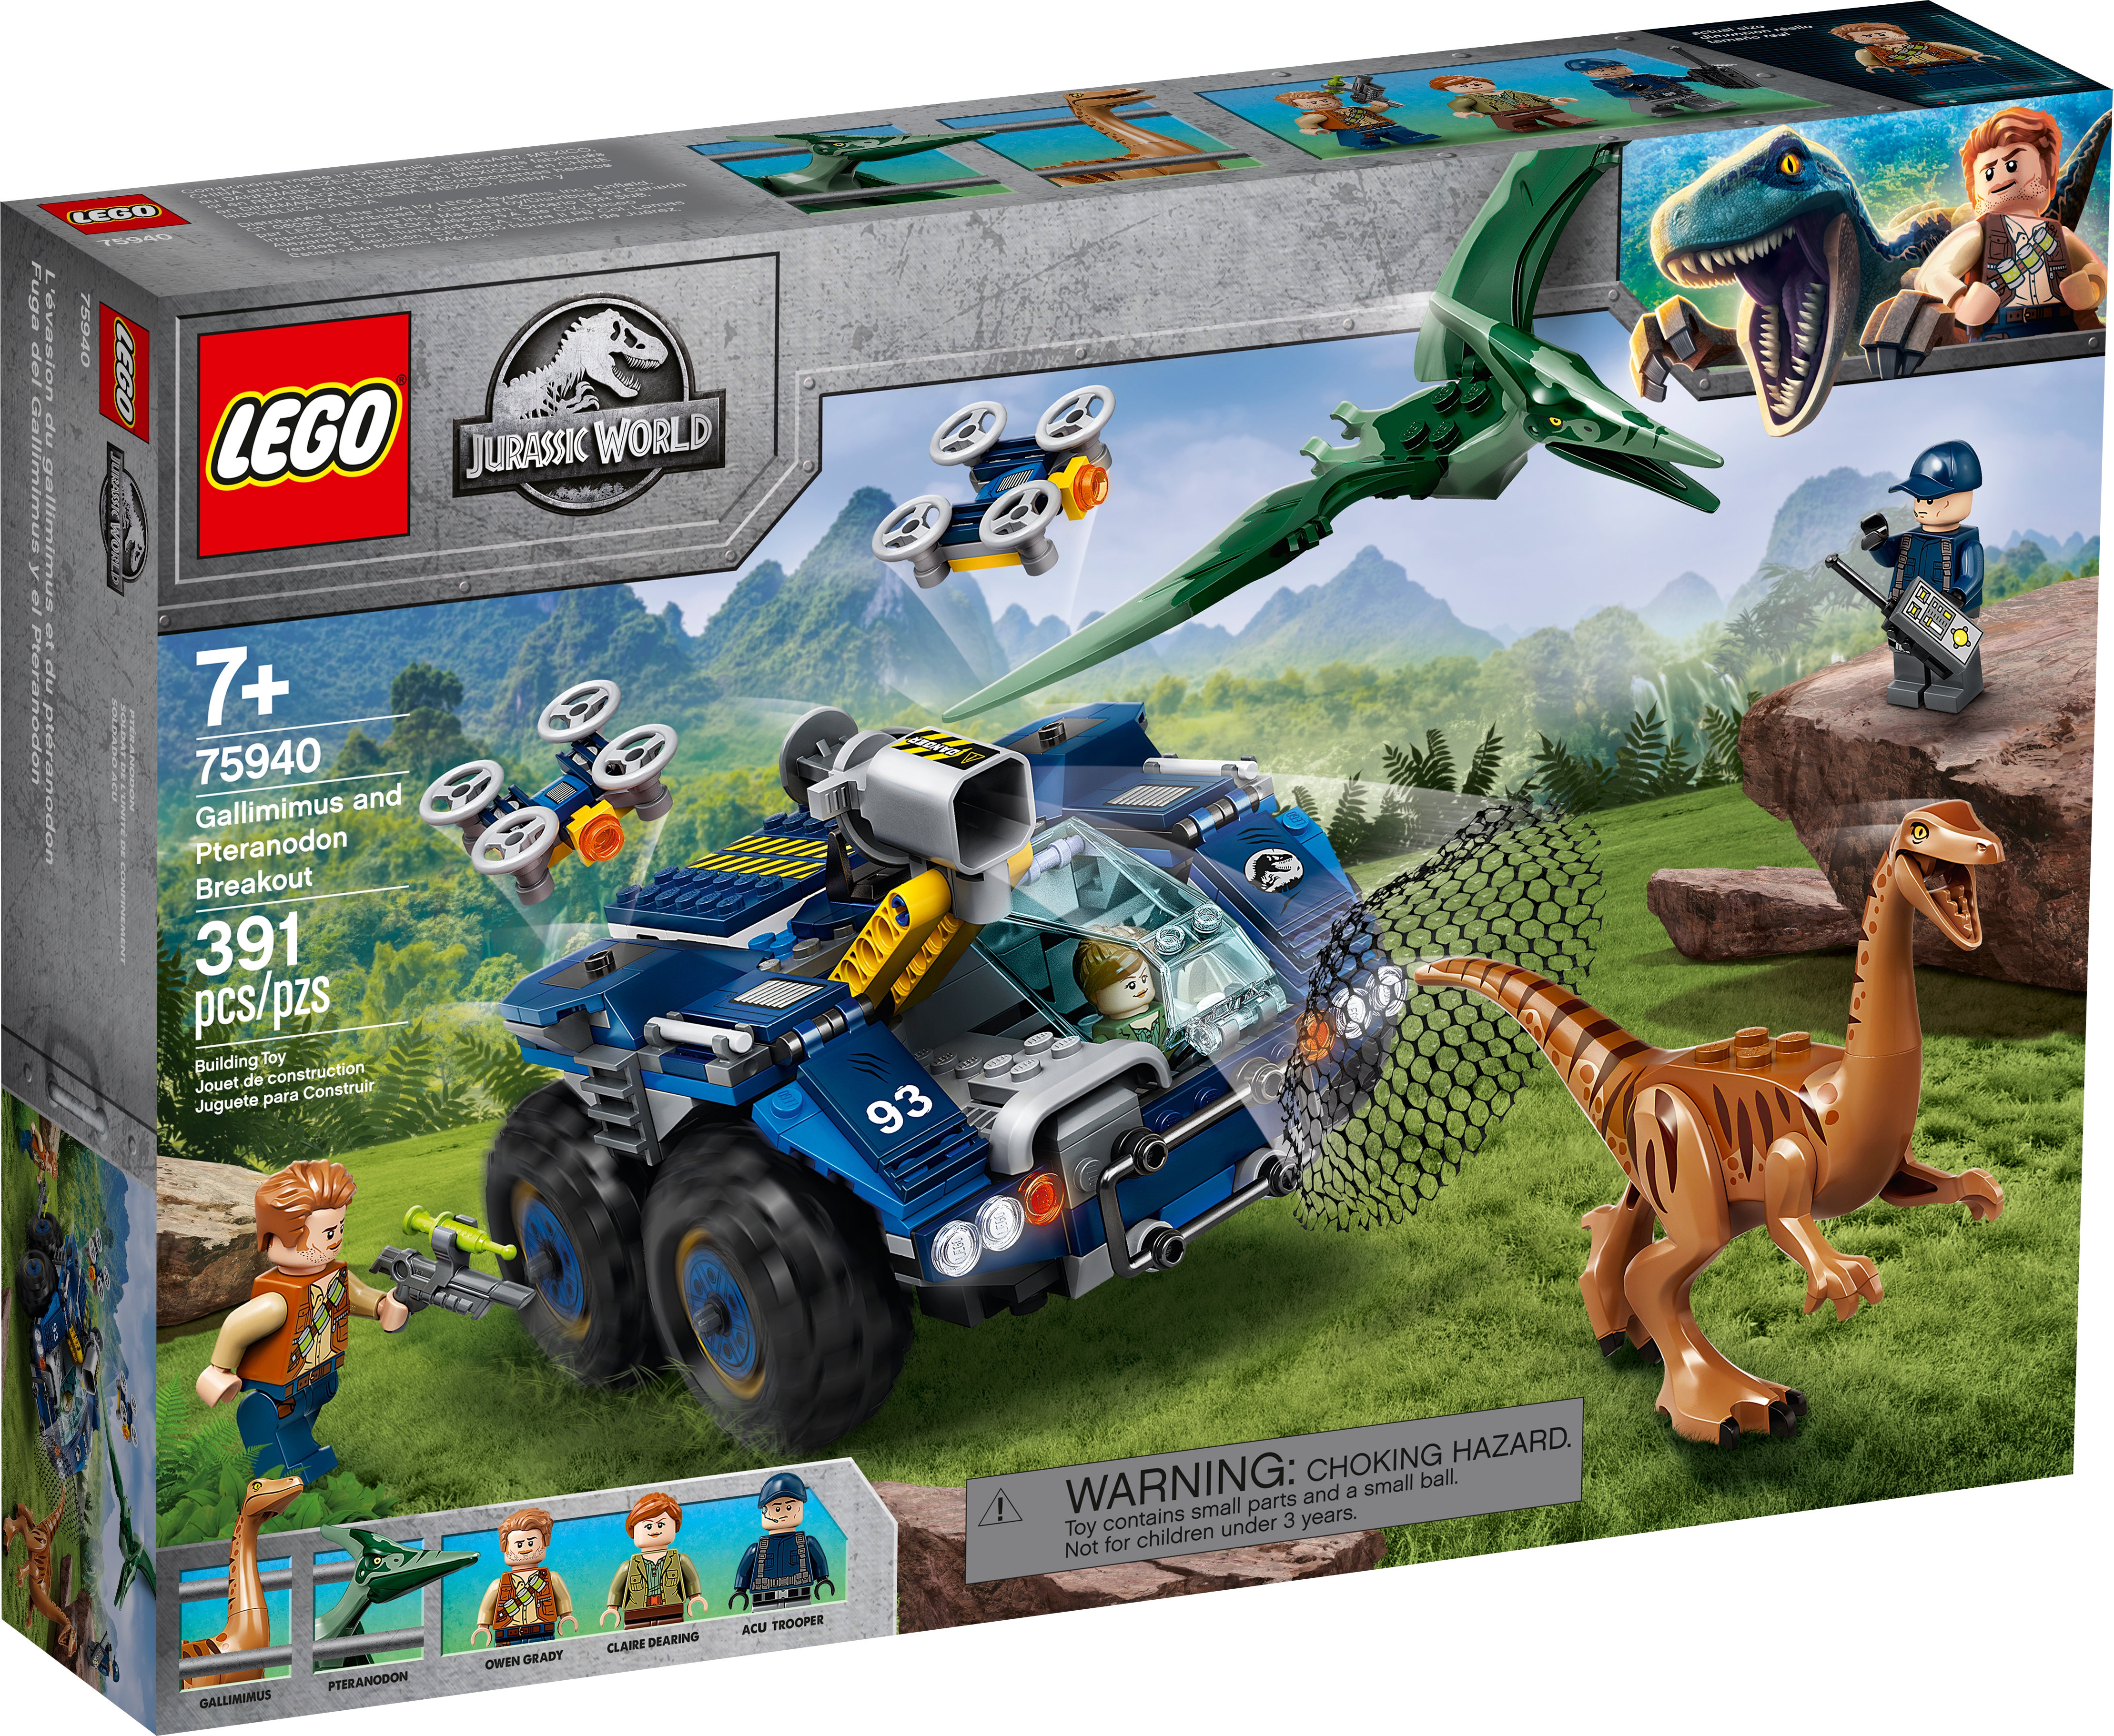 Details about   CLAIRE DEARING 75940 Jurassic World LEGO Minifigure